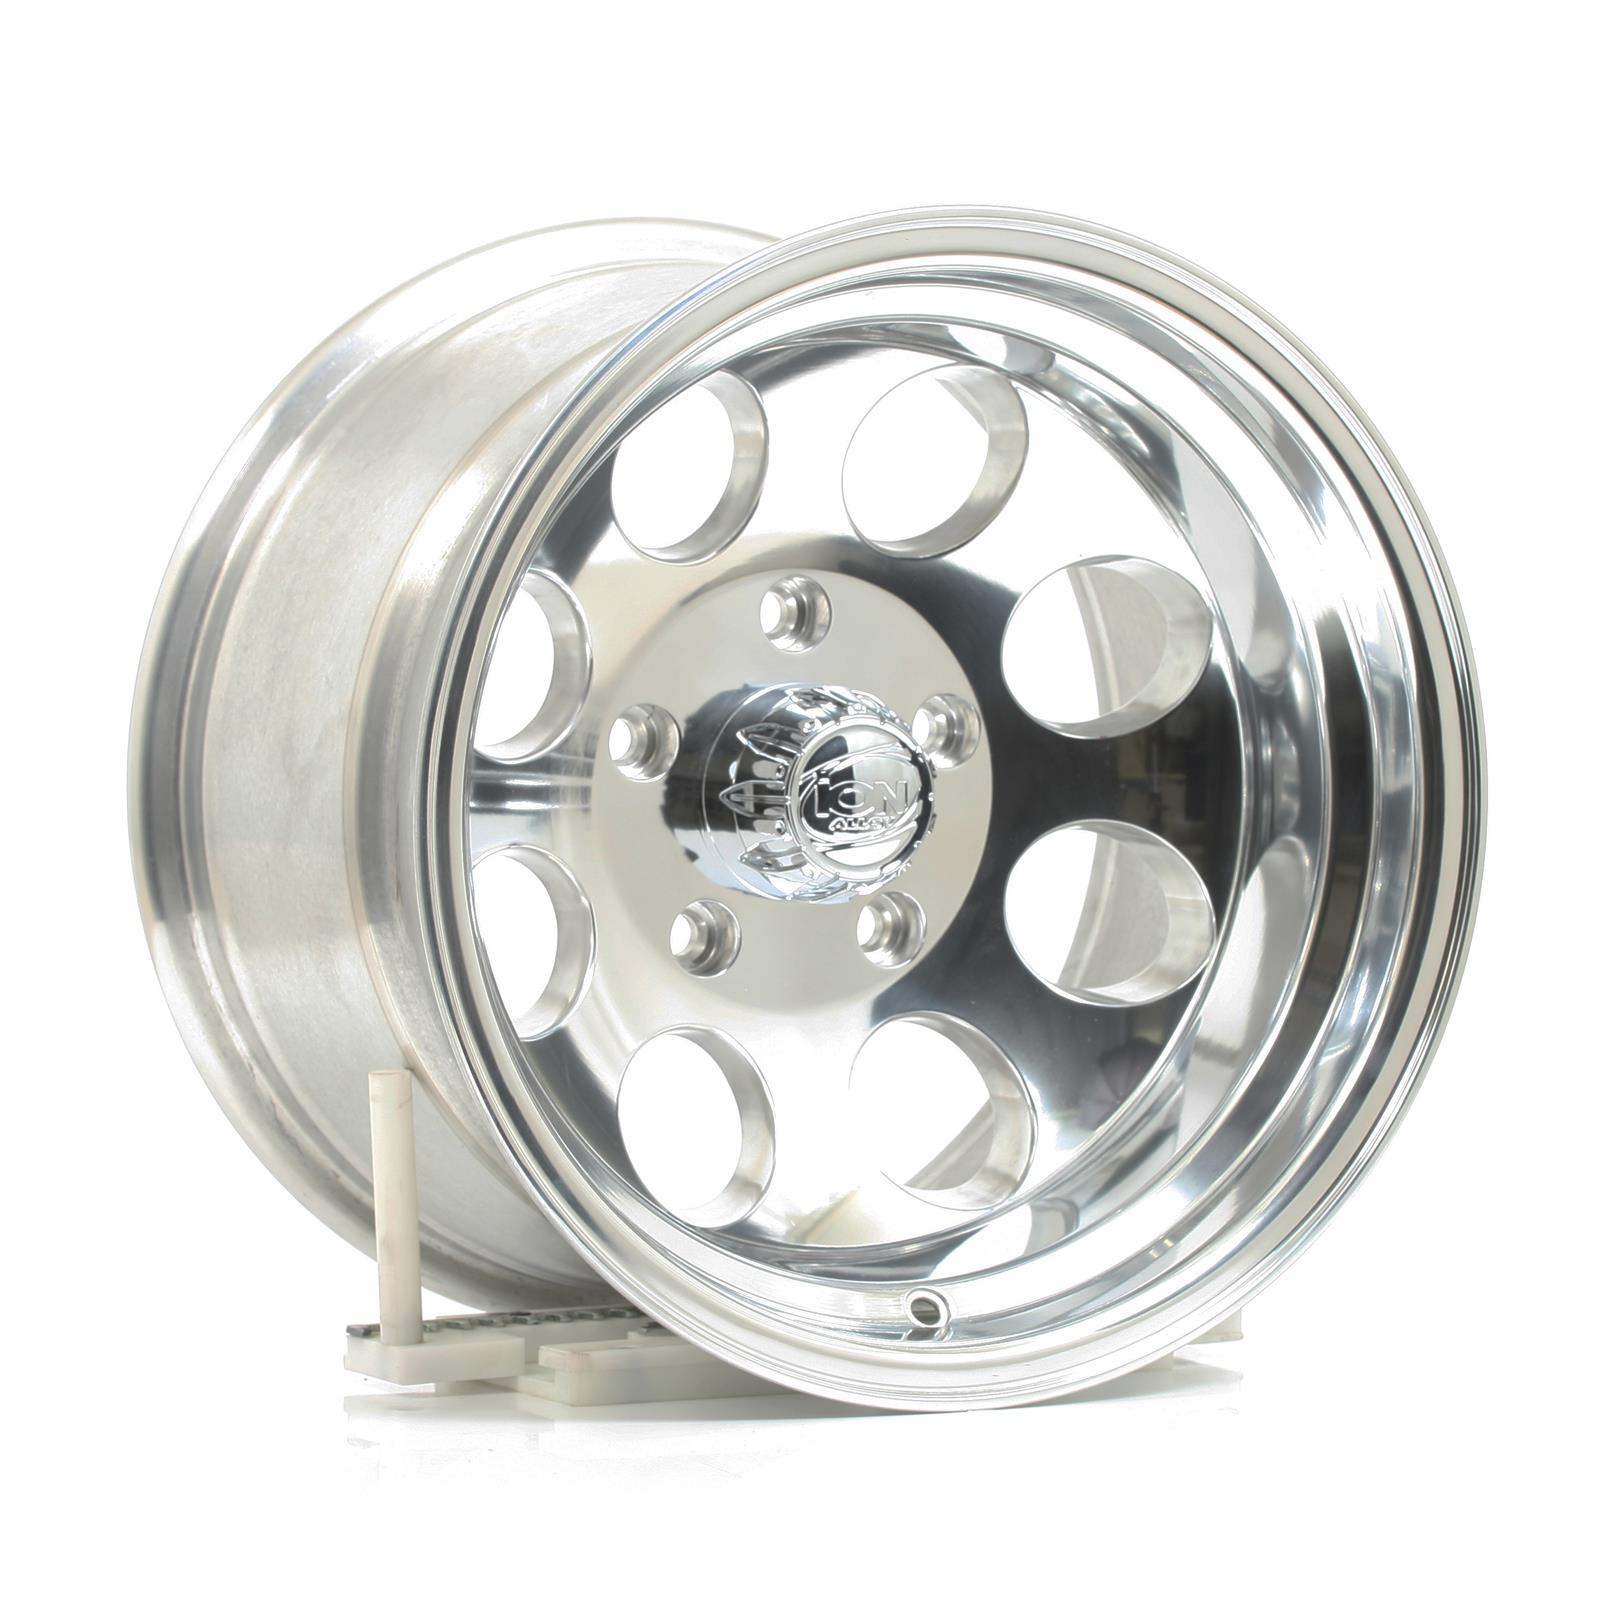 ion-alloy-wheels-171-6135p-ion-alloy-series-171-polished-wheels